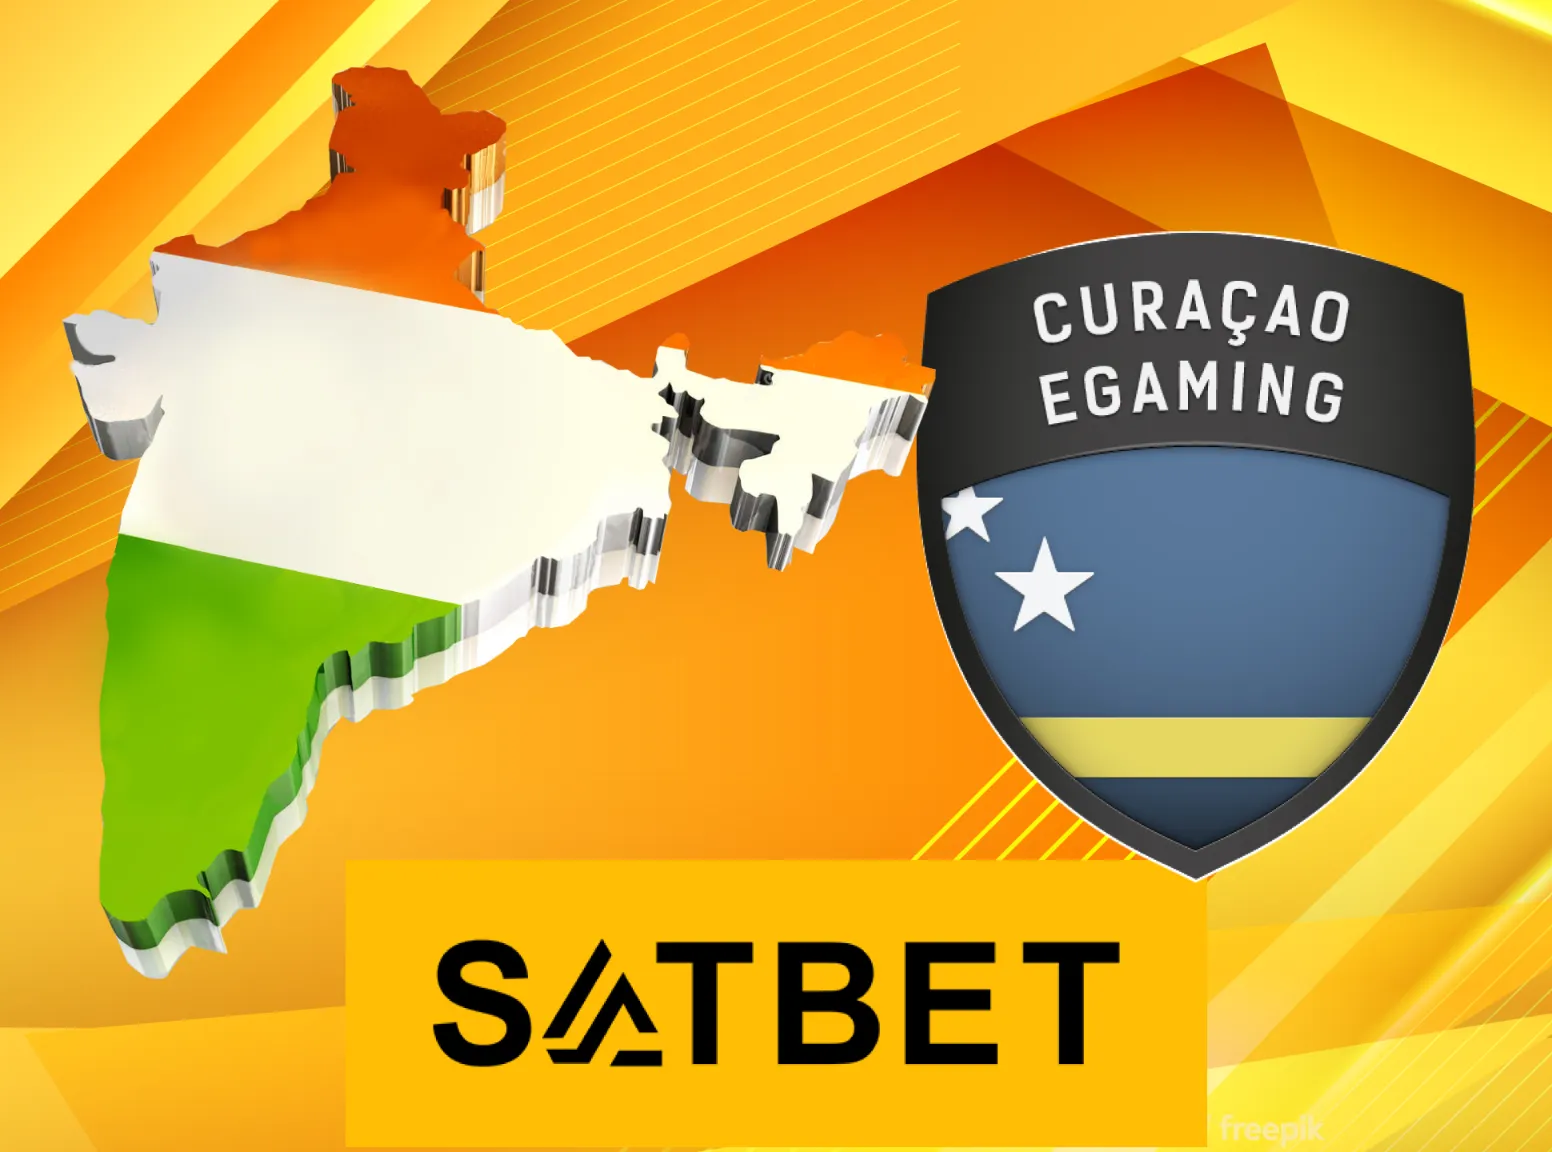 Satbet has all of the required licenses.